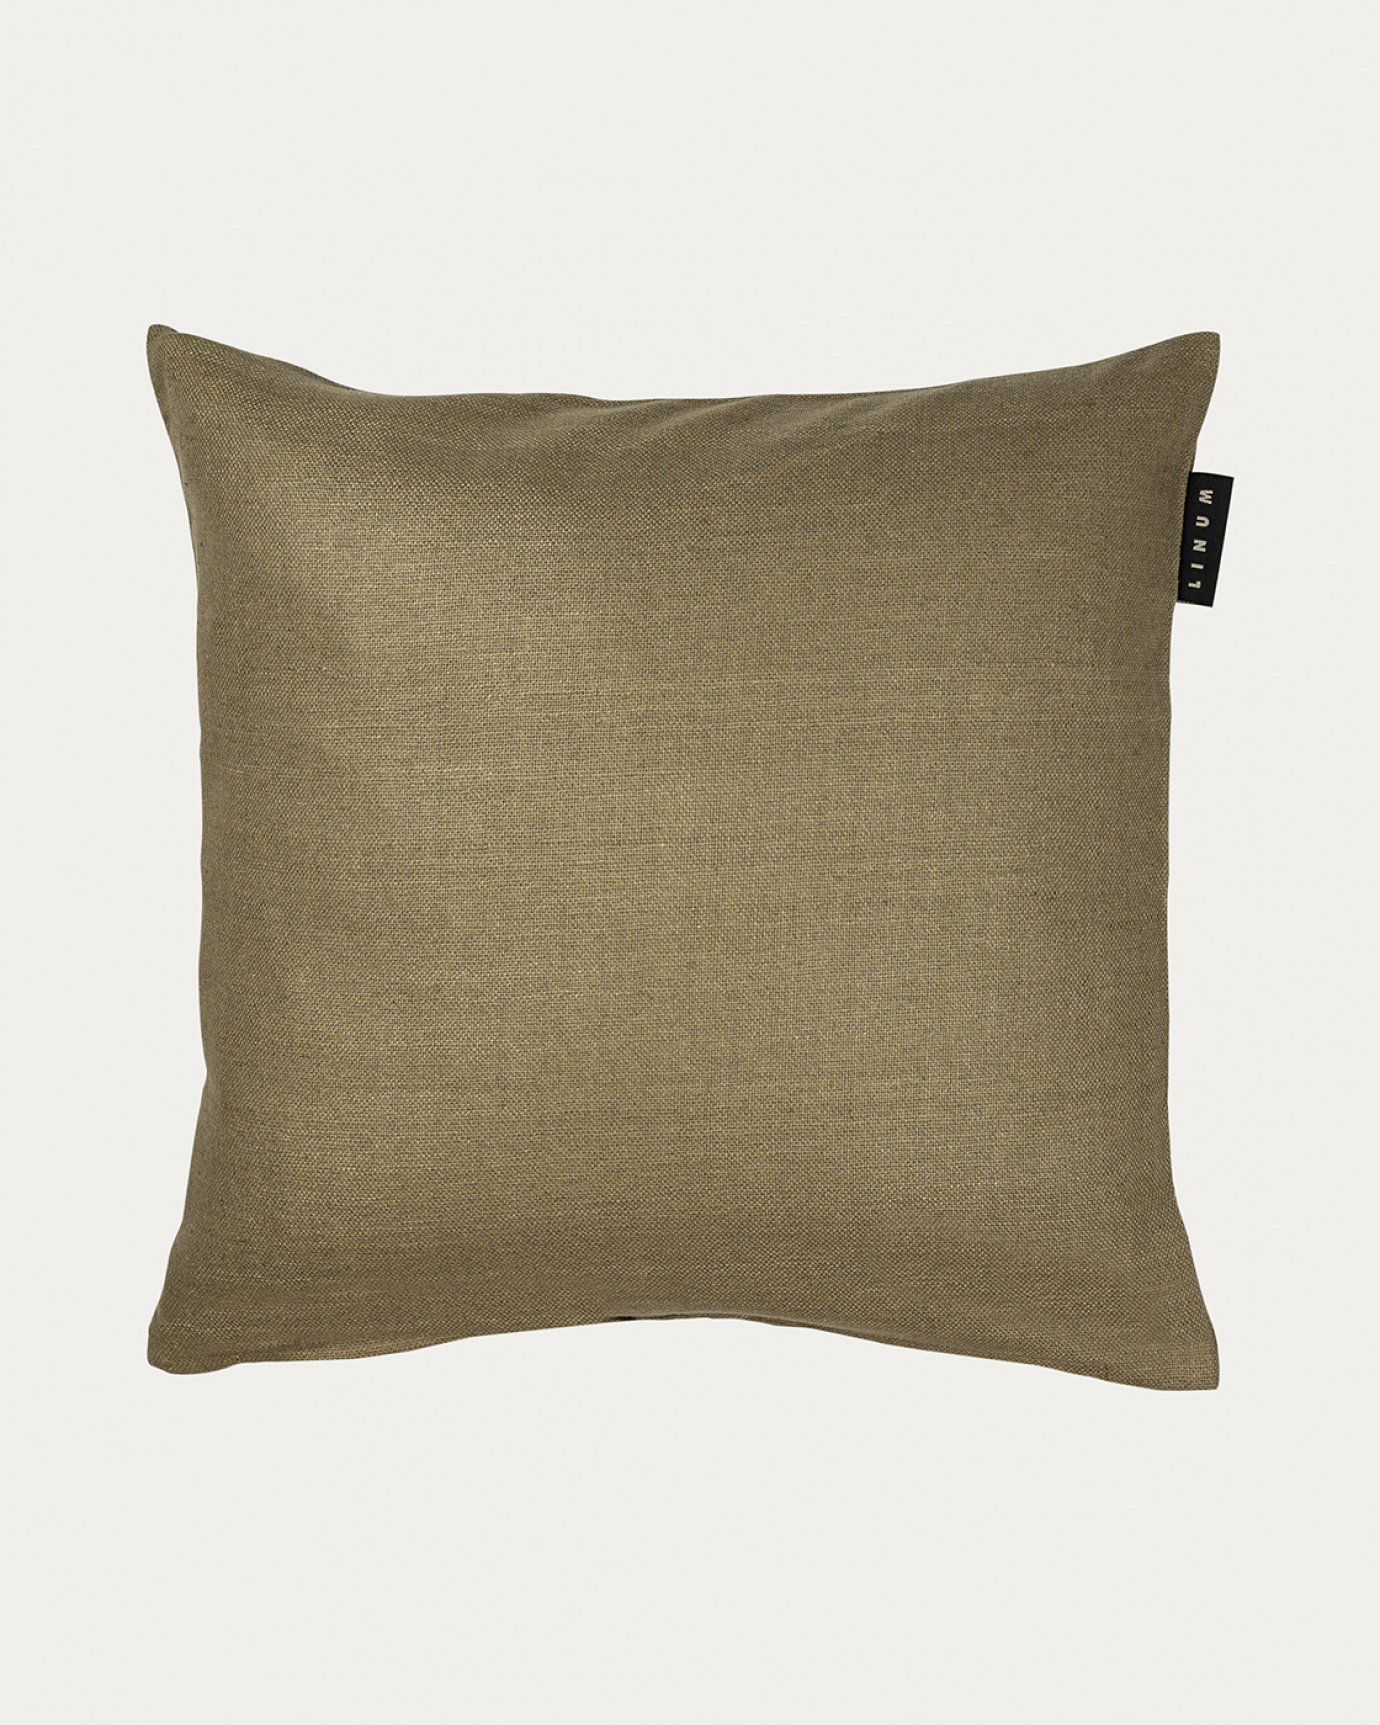 Product image light bear brown SETA cushion cover made of 100% raw silk that gives a nice lustre from LINUM DESIGN. Size 50x50 cm.